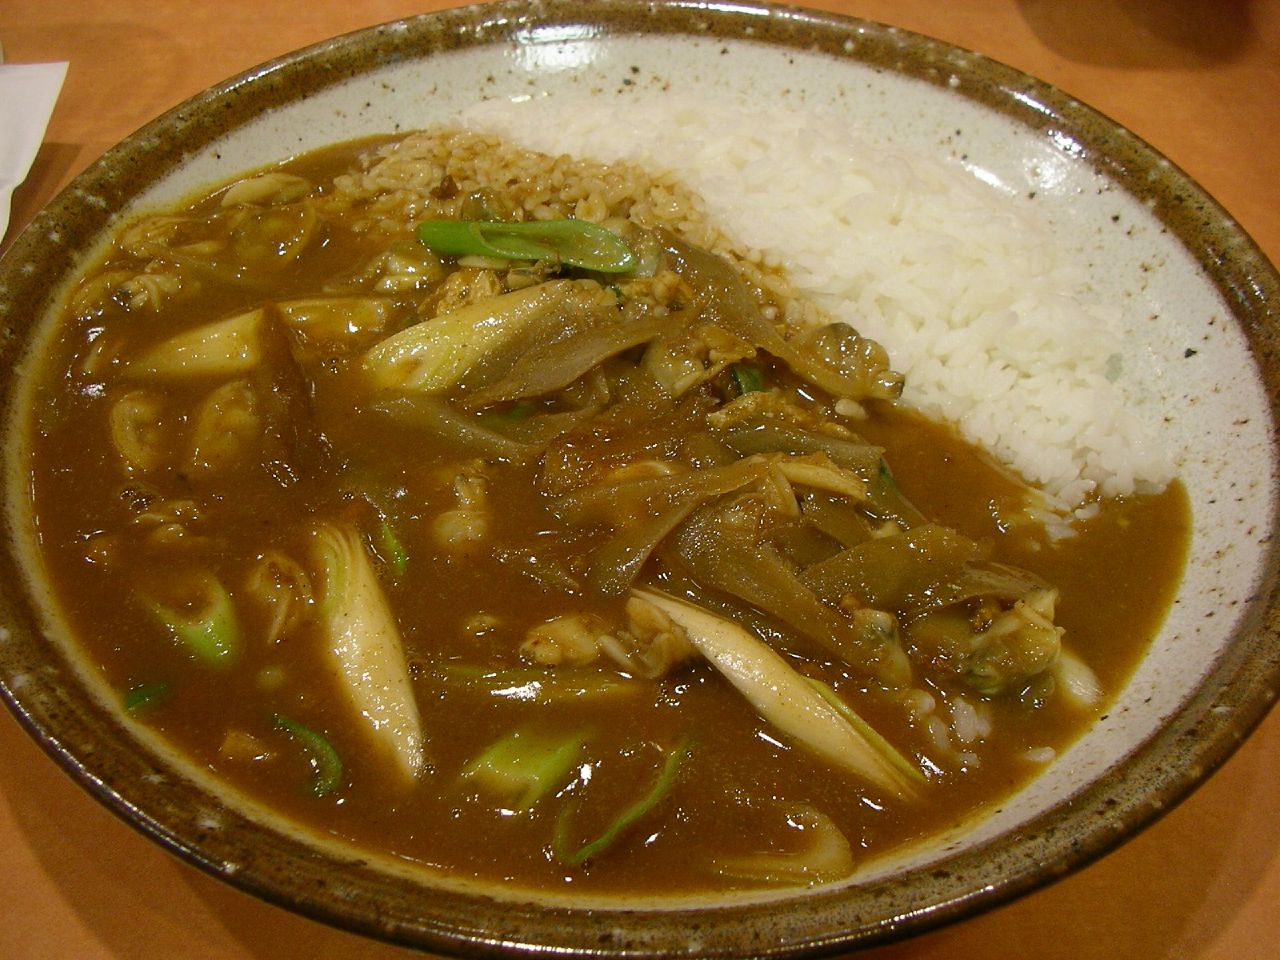 this dish has many different vegetables and rice in it